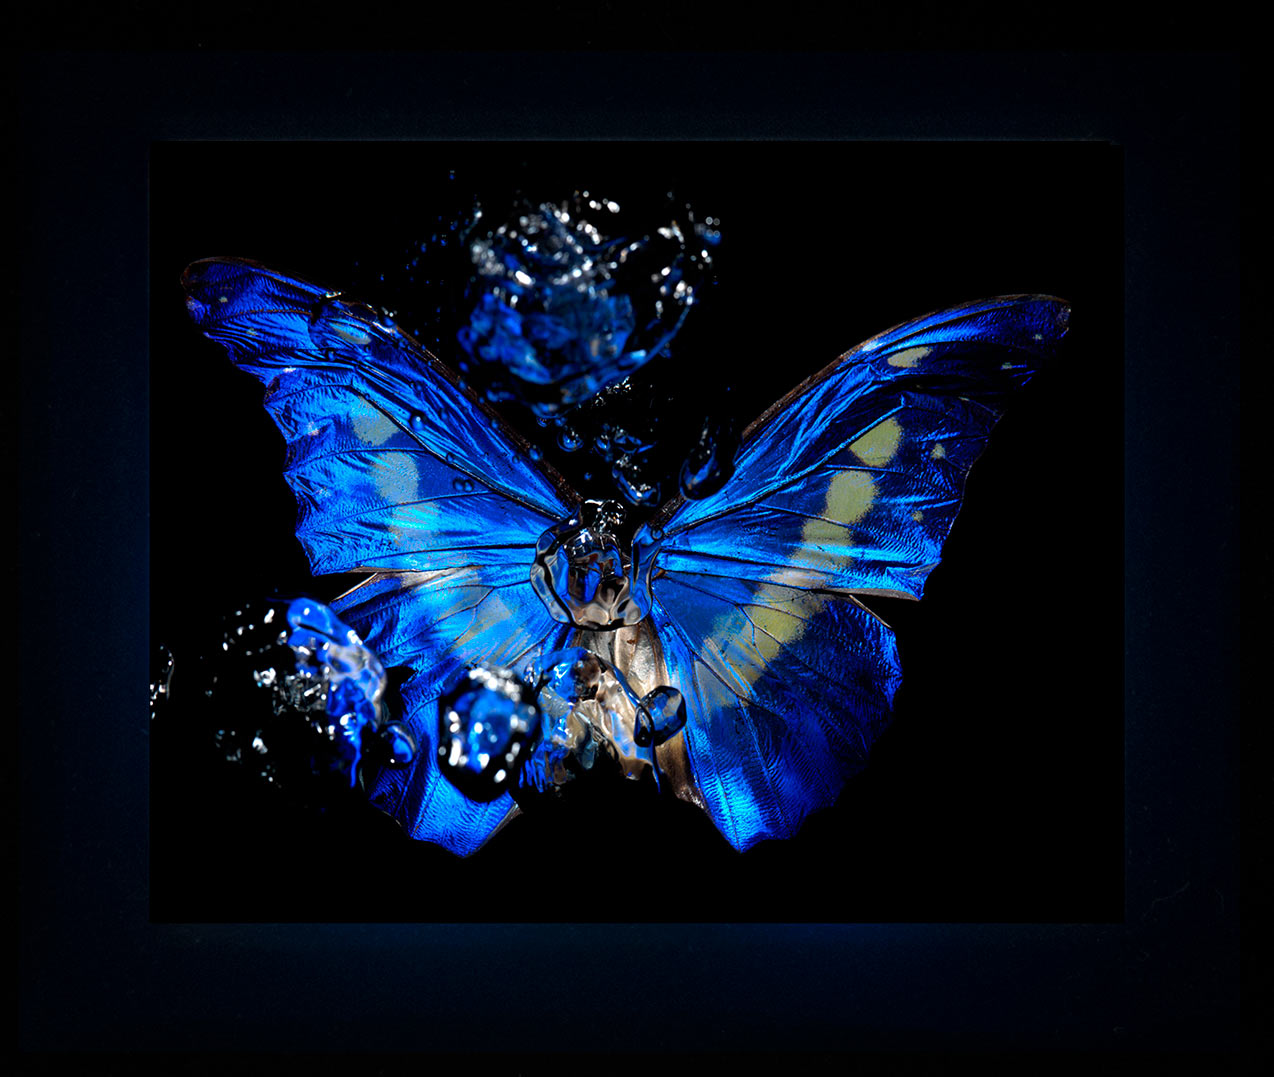 Transparency of a dream illuminated a collection of blue Morpho butterfly artist proof artworks released